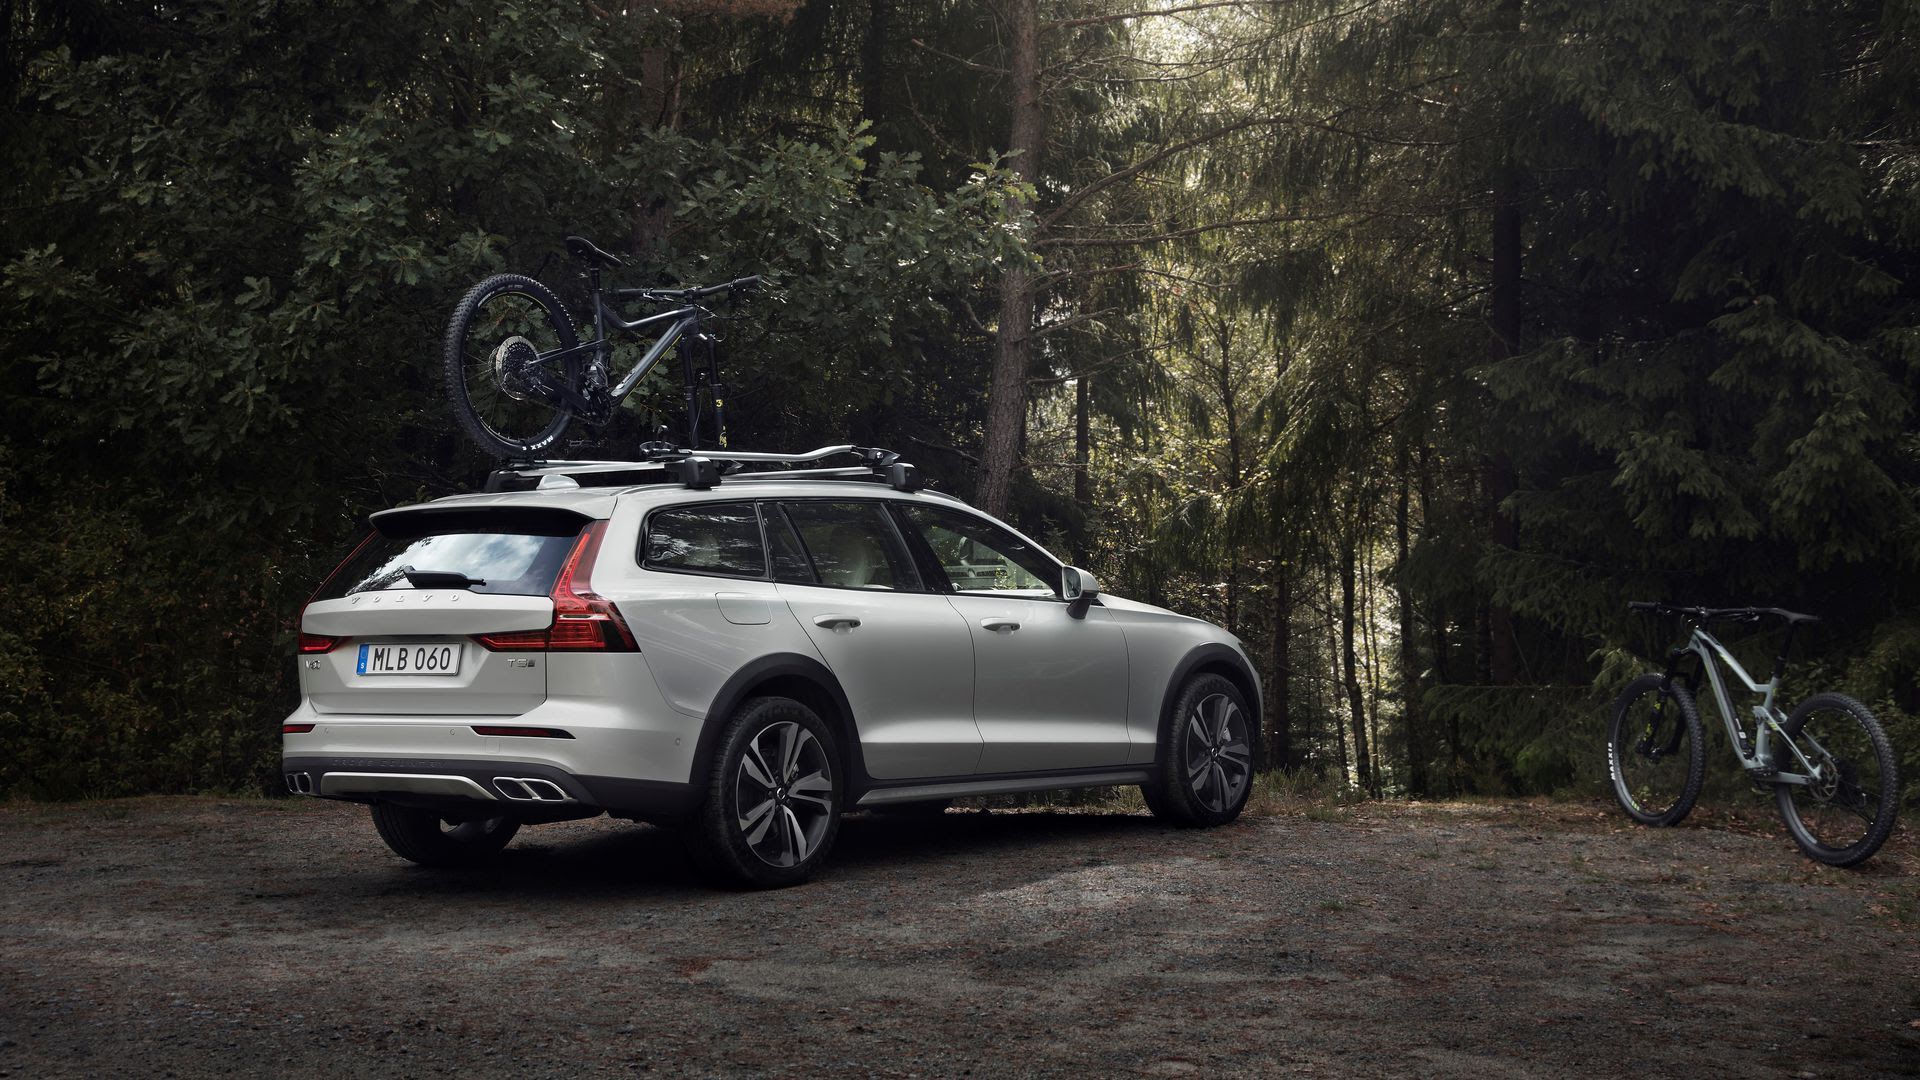 The volvo cross country wagon in a forest.